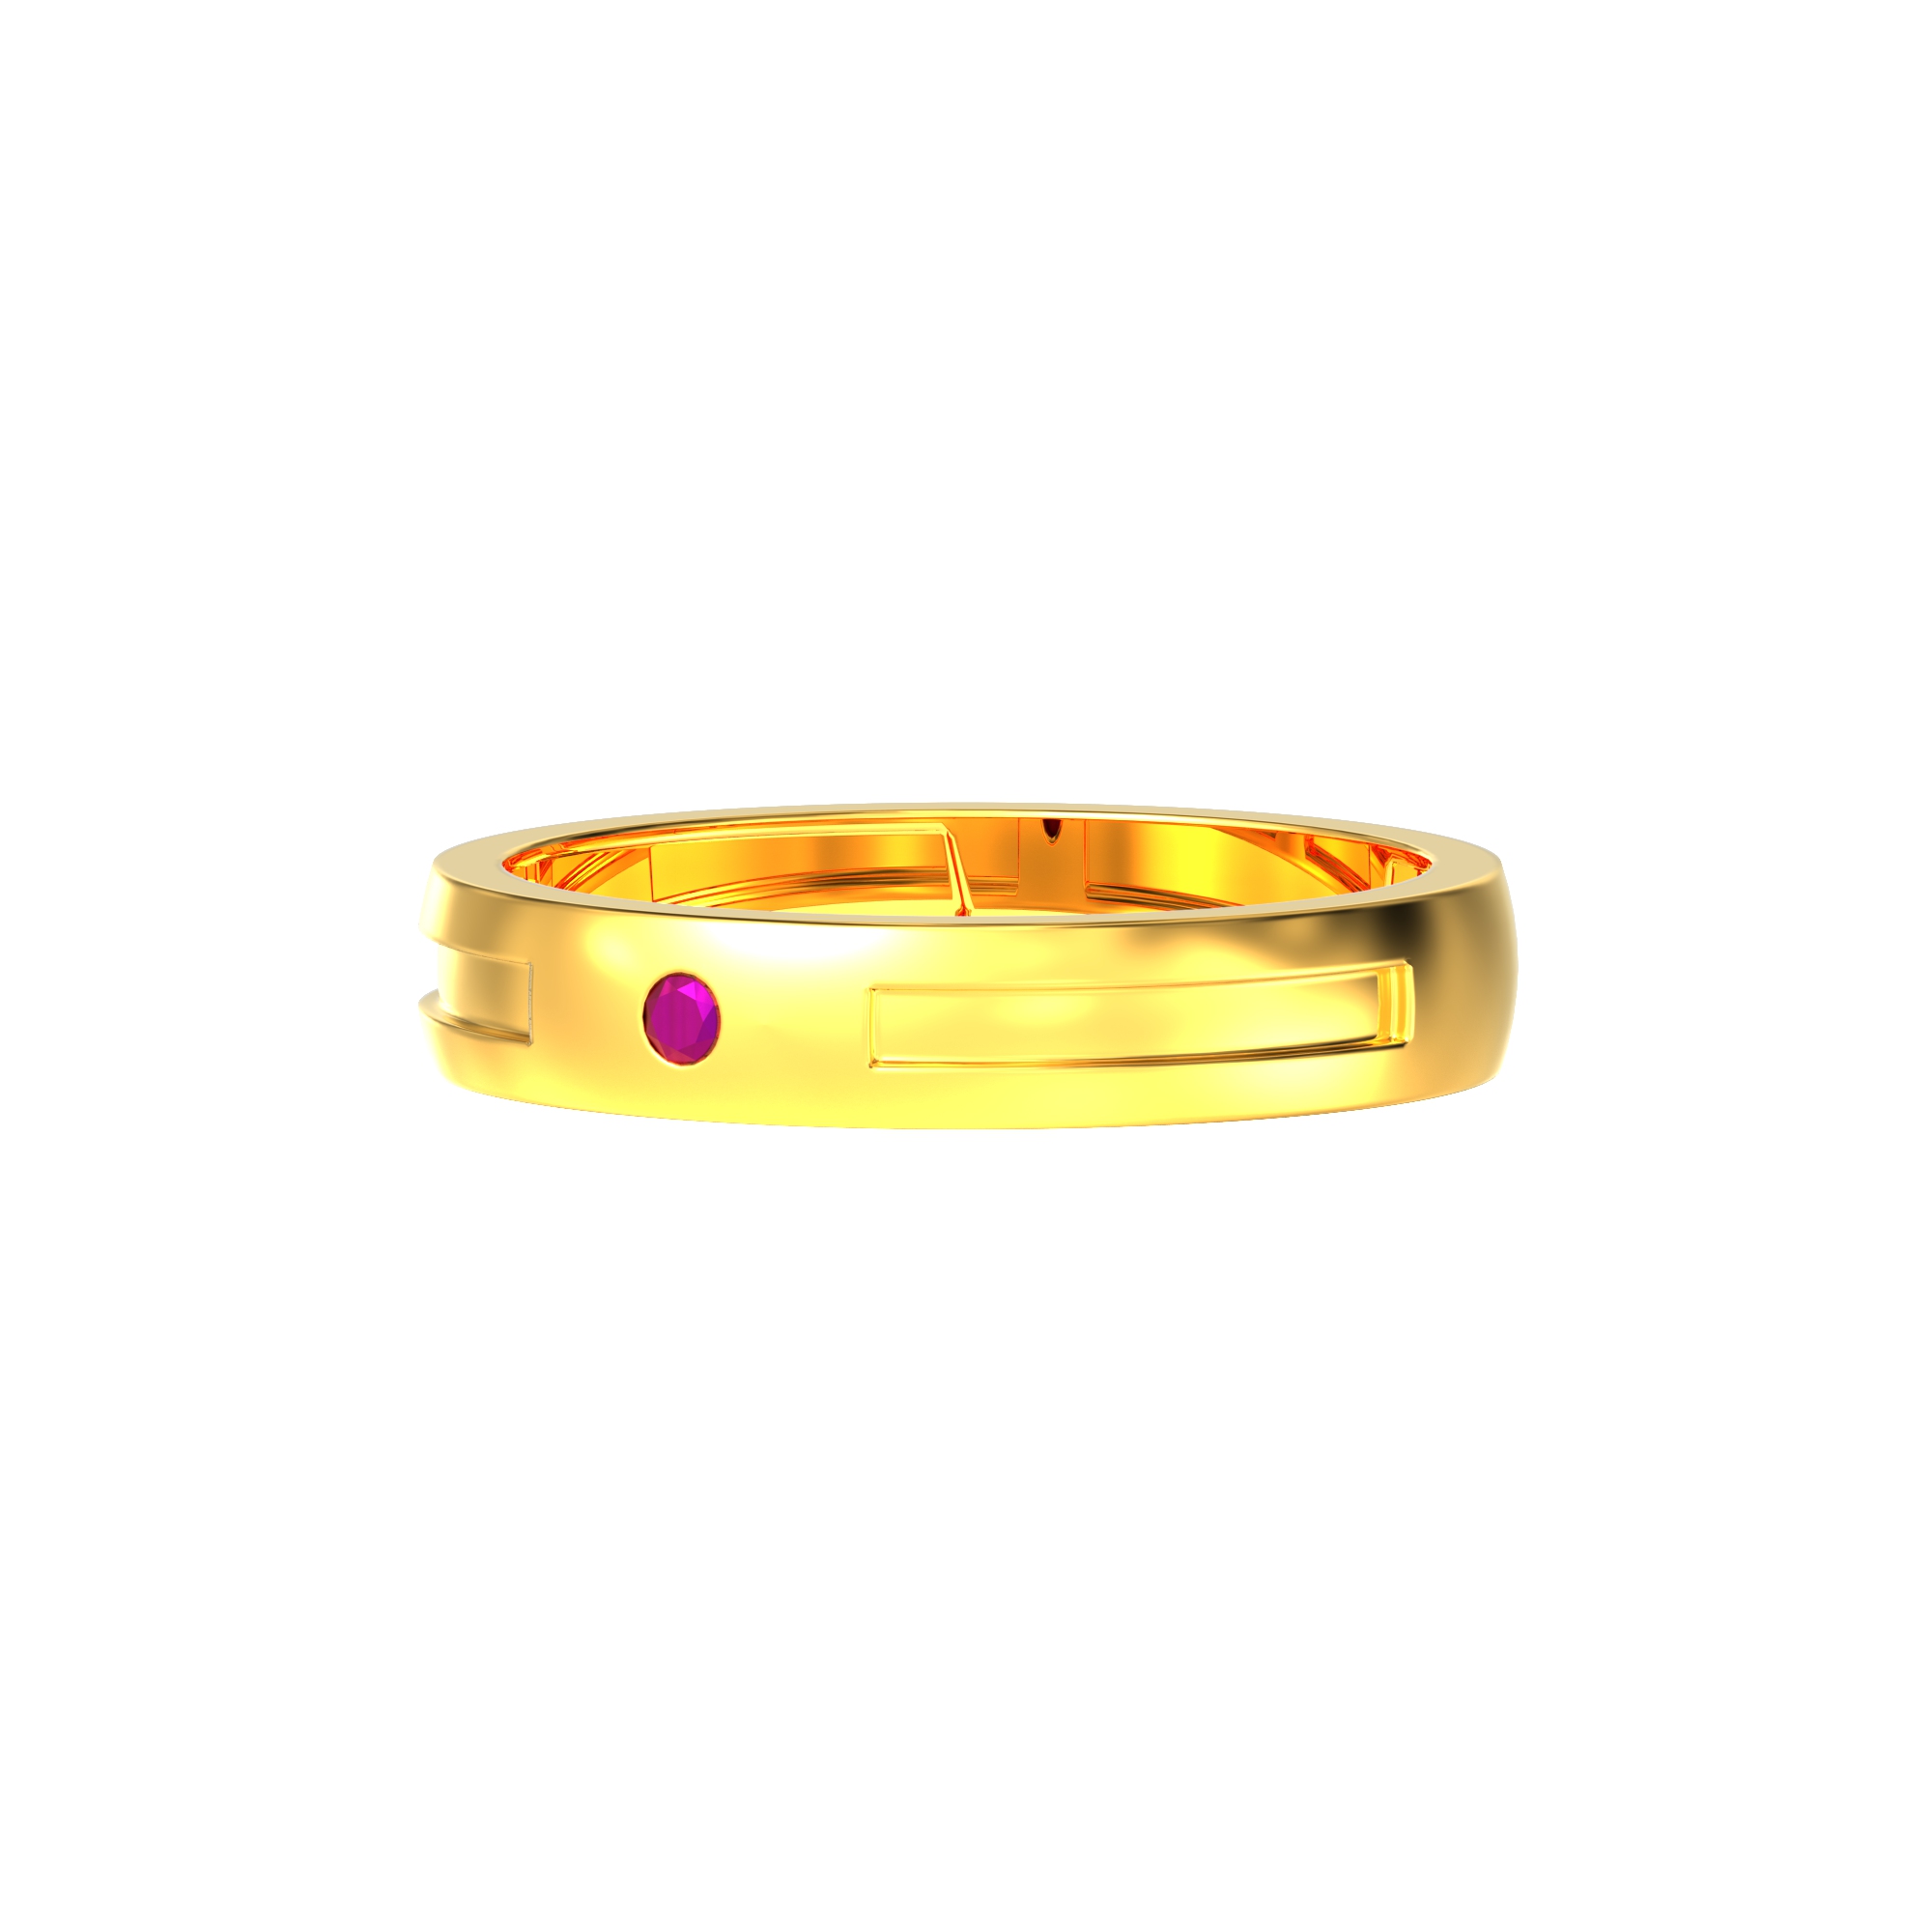 Gents Gold Ring with Geometric Design